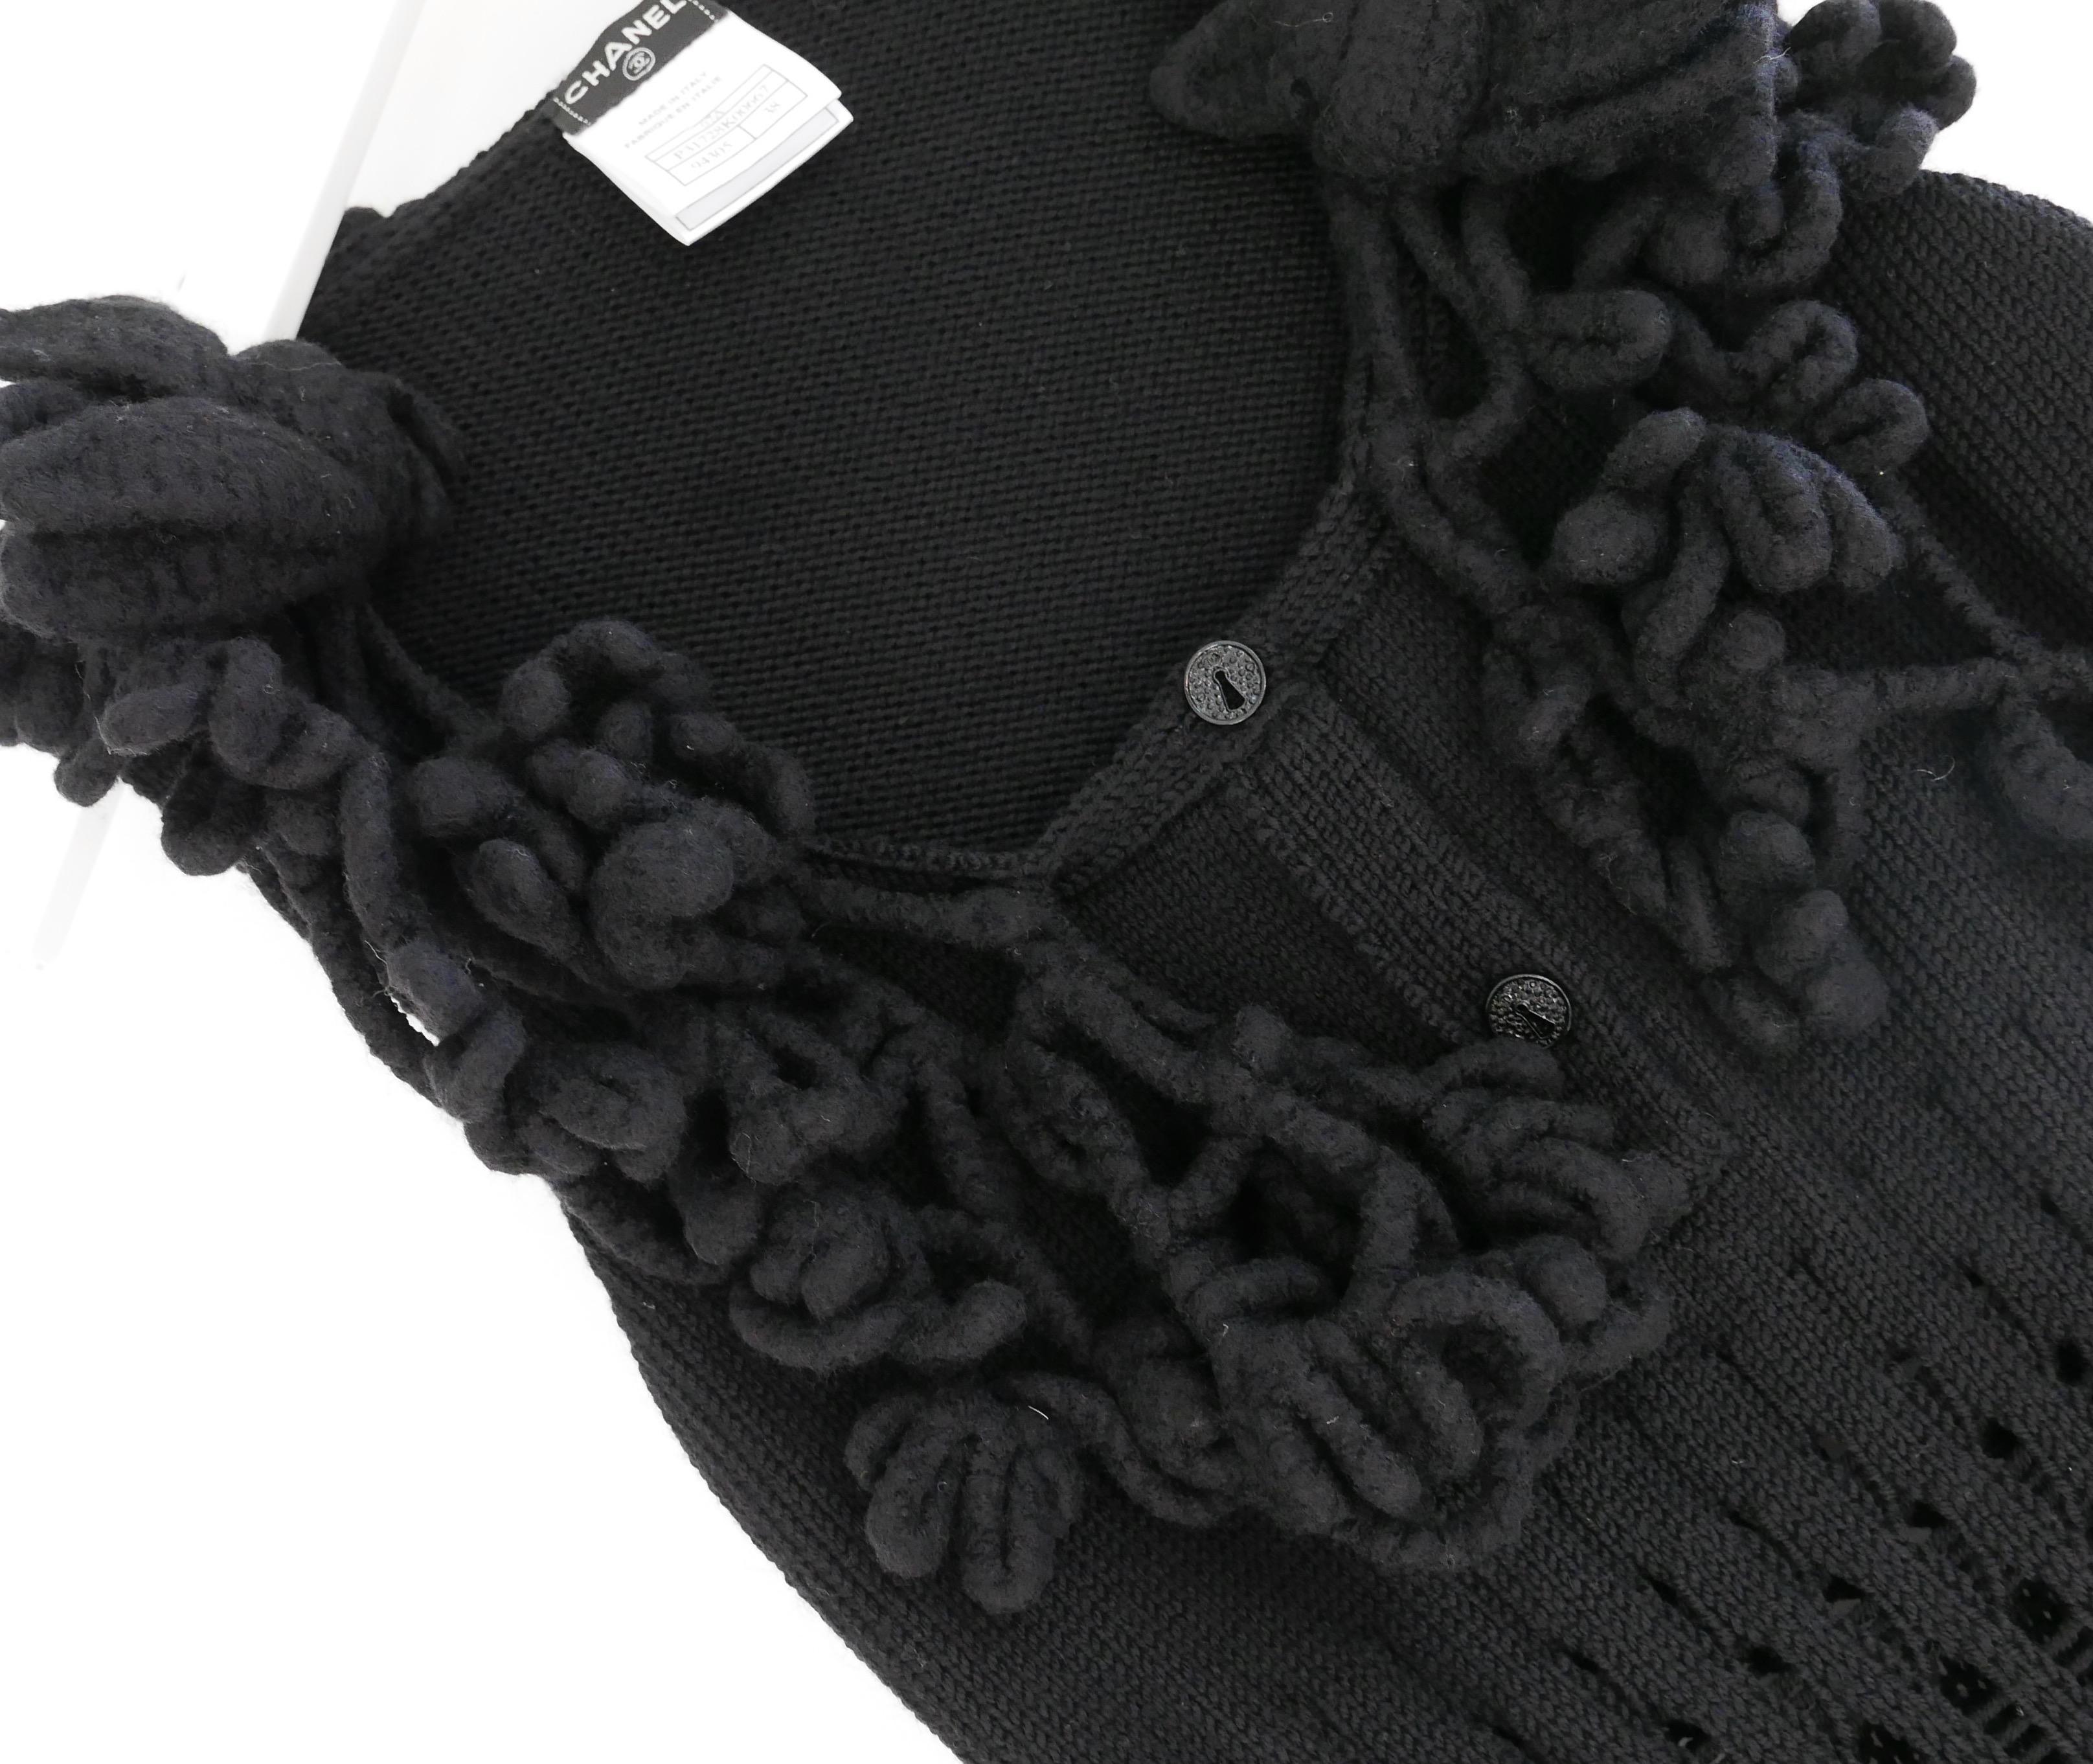 Stunning Chanel sleeveless sweater from the Fall 2007 collection. Unworn. Made from soft black wool and cashmere (70:30) with a fancy ribbed knit, it has sculptural floral wool embellishment to the neck and 2 sparkling lock buttons to the front.